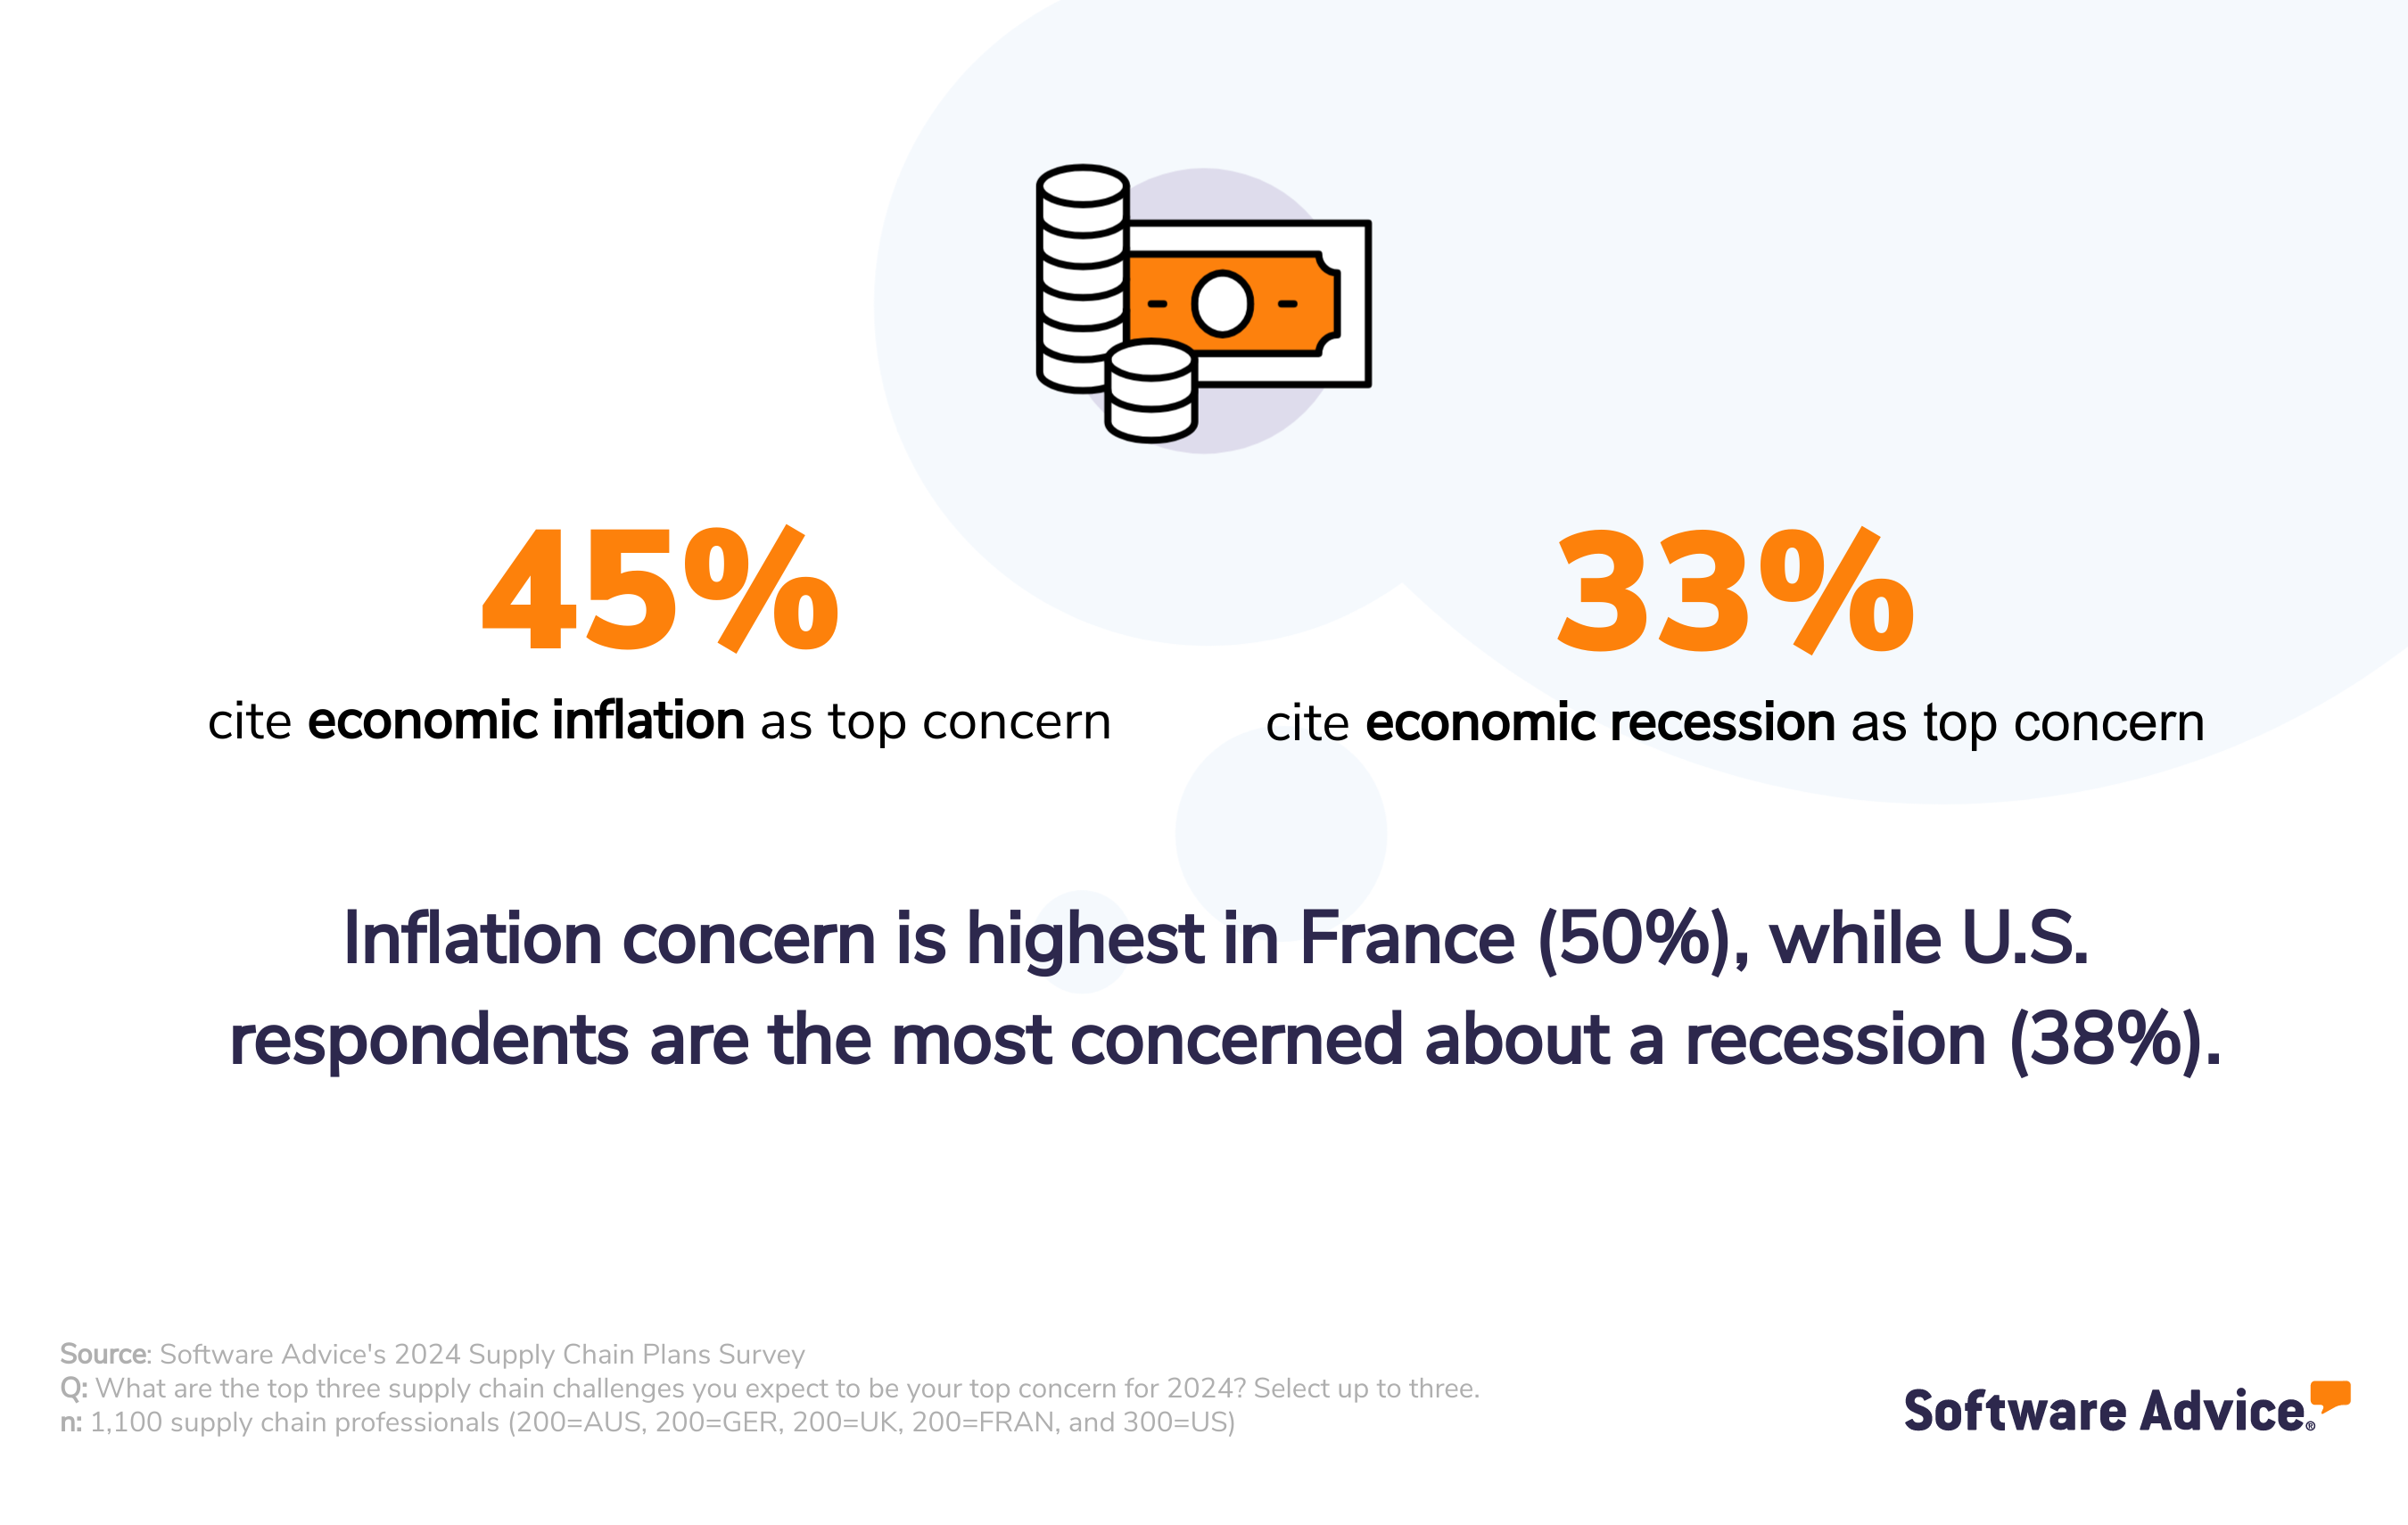 45% of SCM leaders cite economic inflation as their top concern, and 33% cite economic recession as top concern.